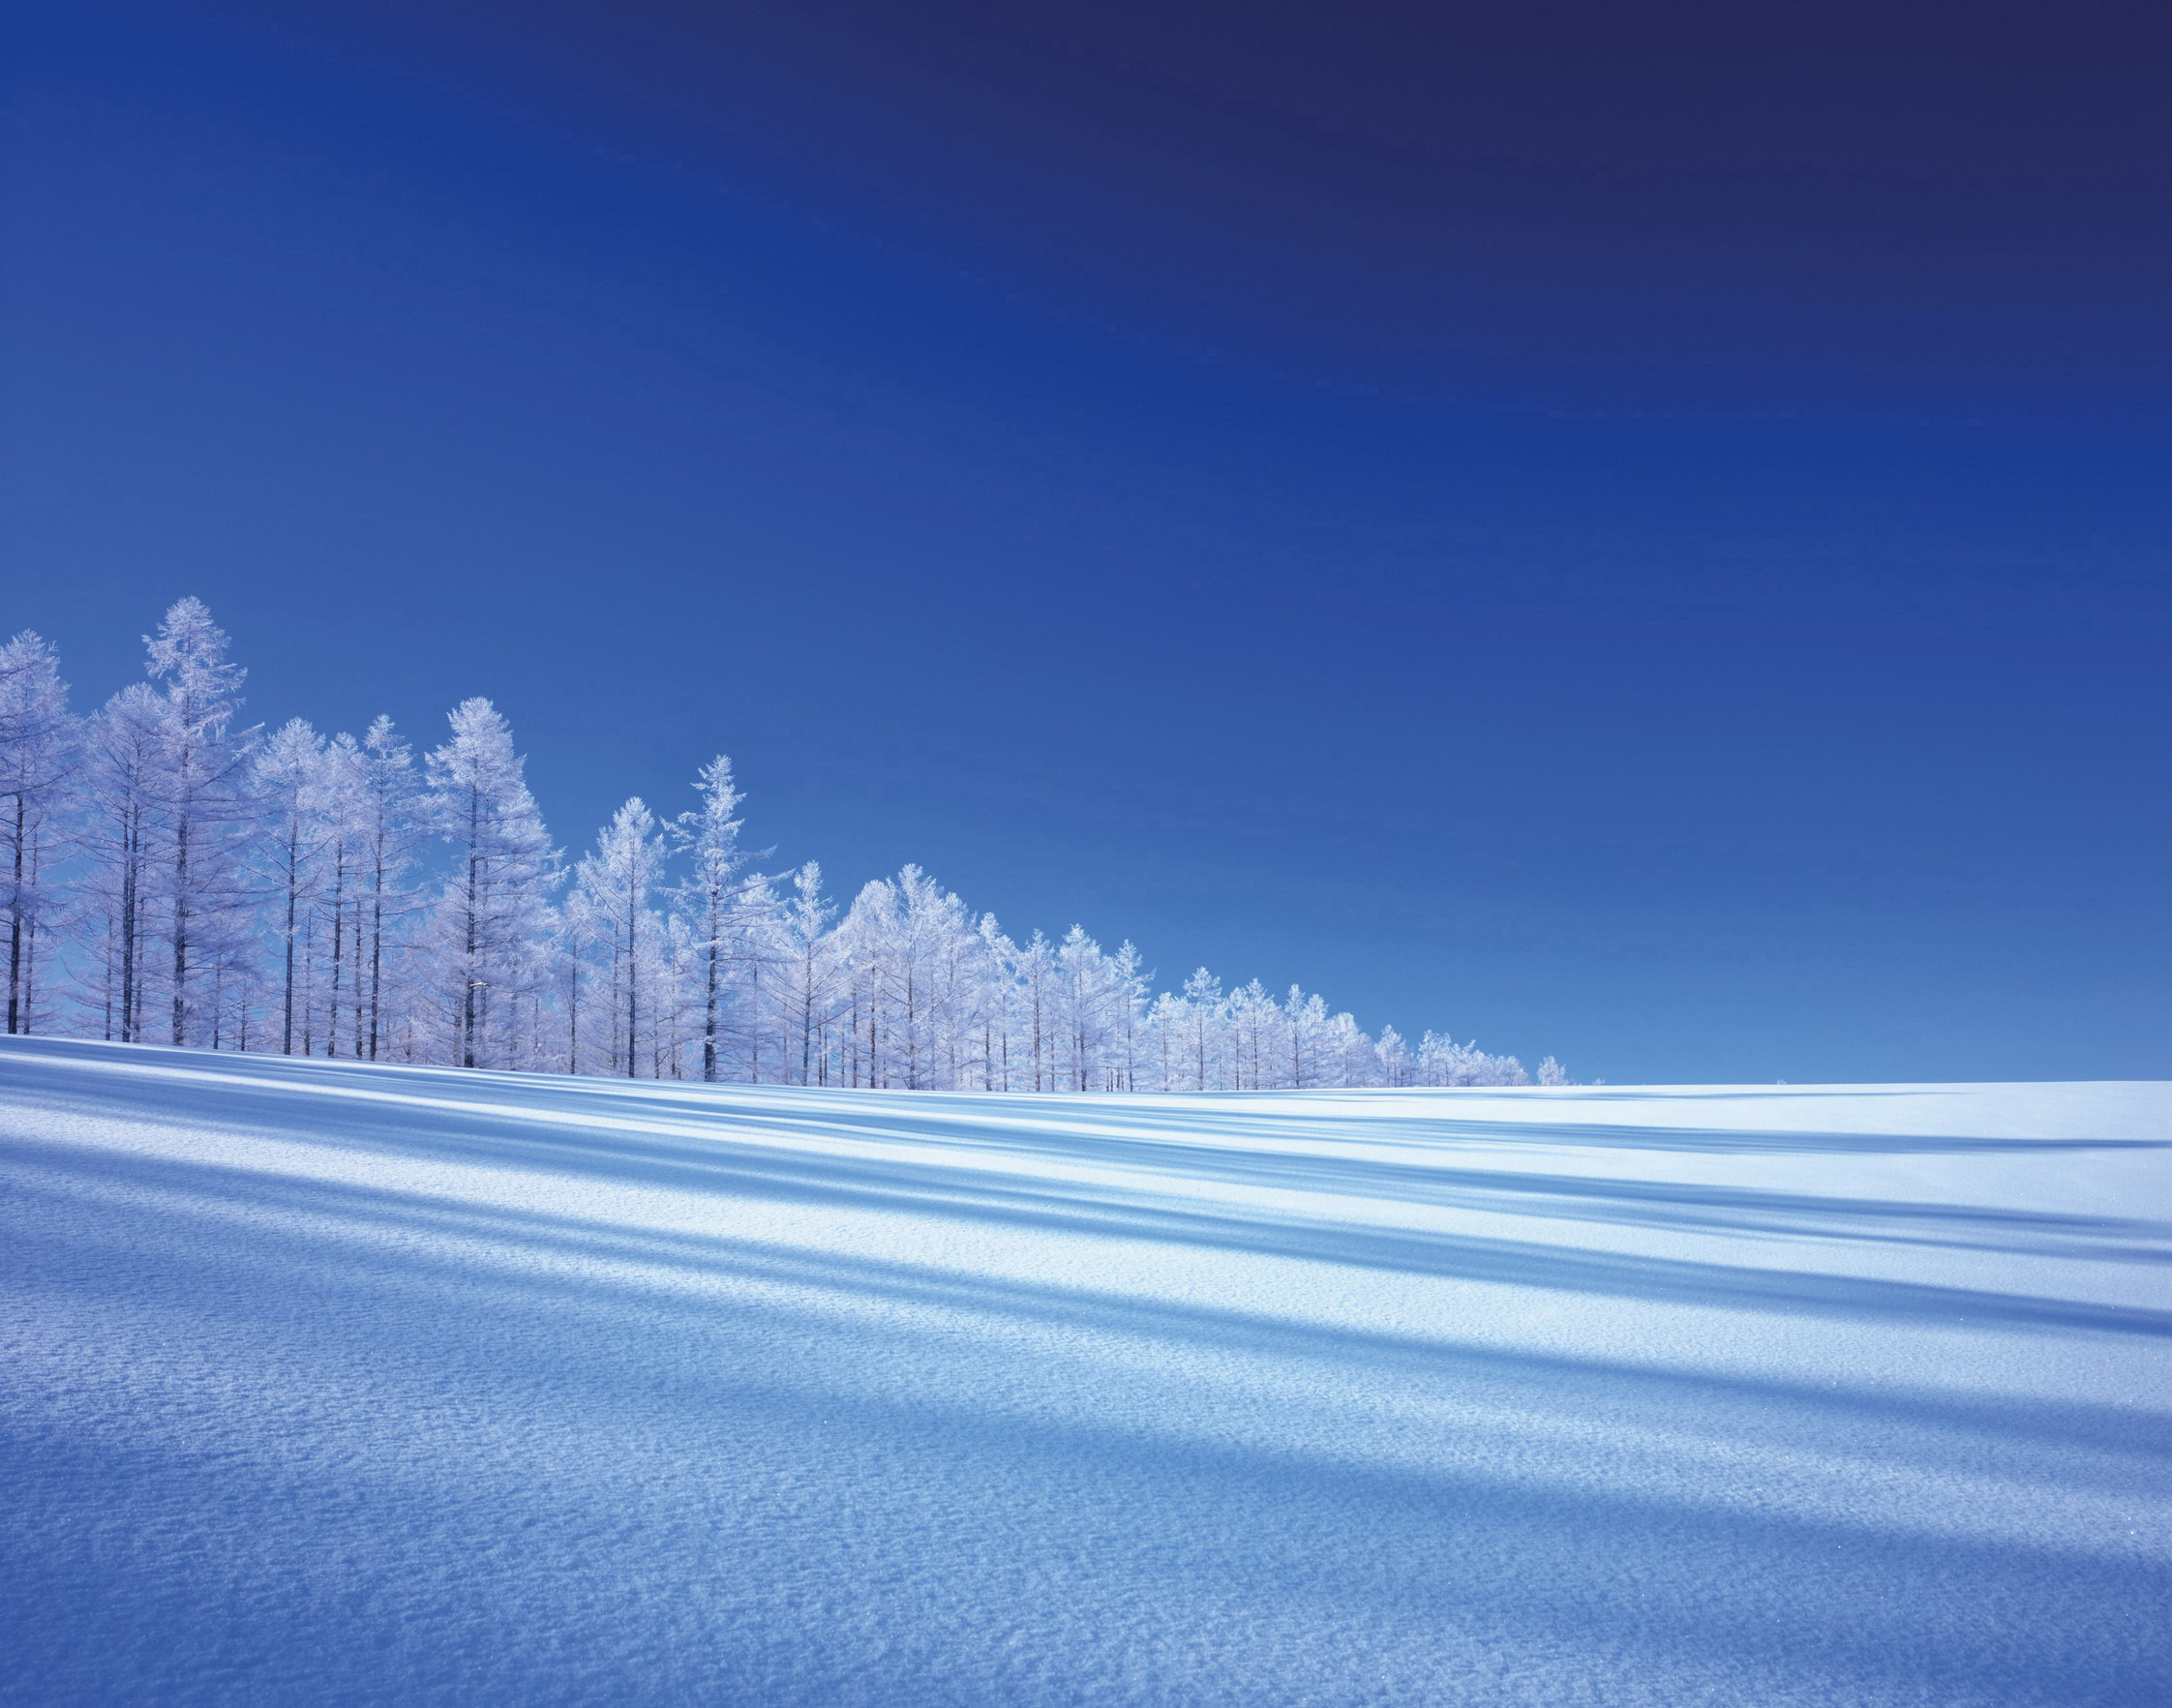 Masami Goto Getty Images Kamikawa Wintry scenes at a snowfield in Biei - photo 4